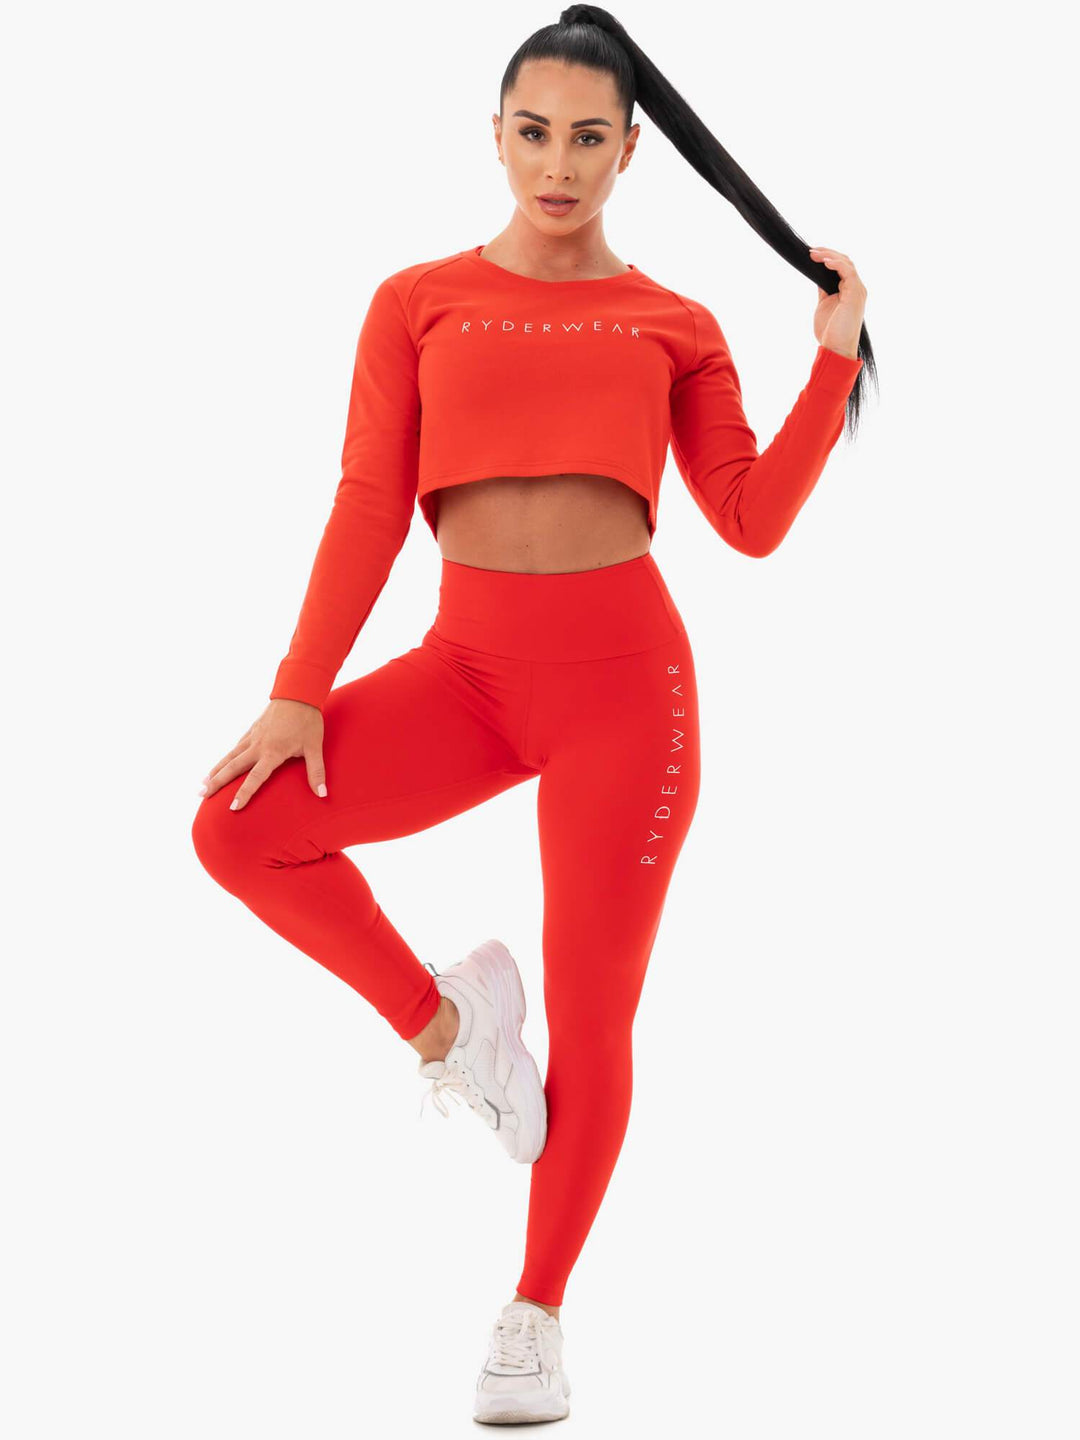 Staples Cropped Sweater - Red Clothing Ryderwear 